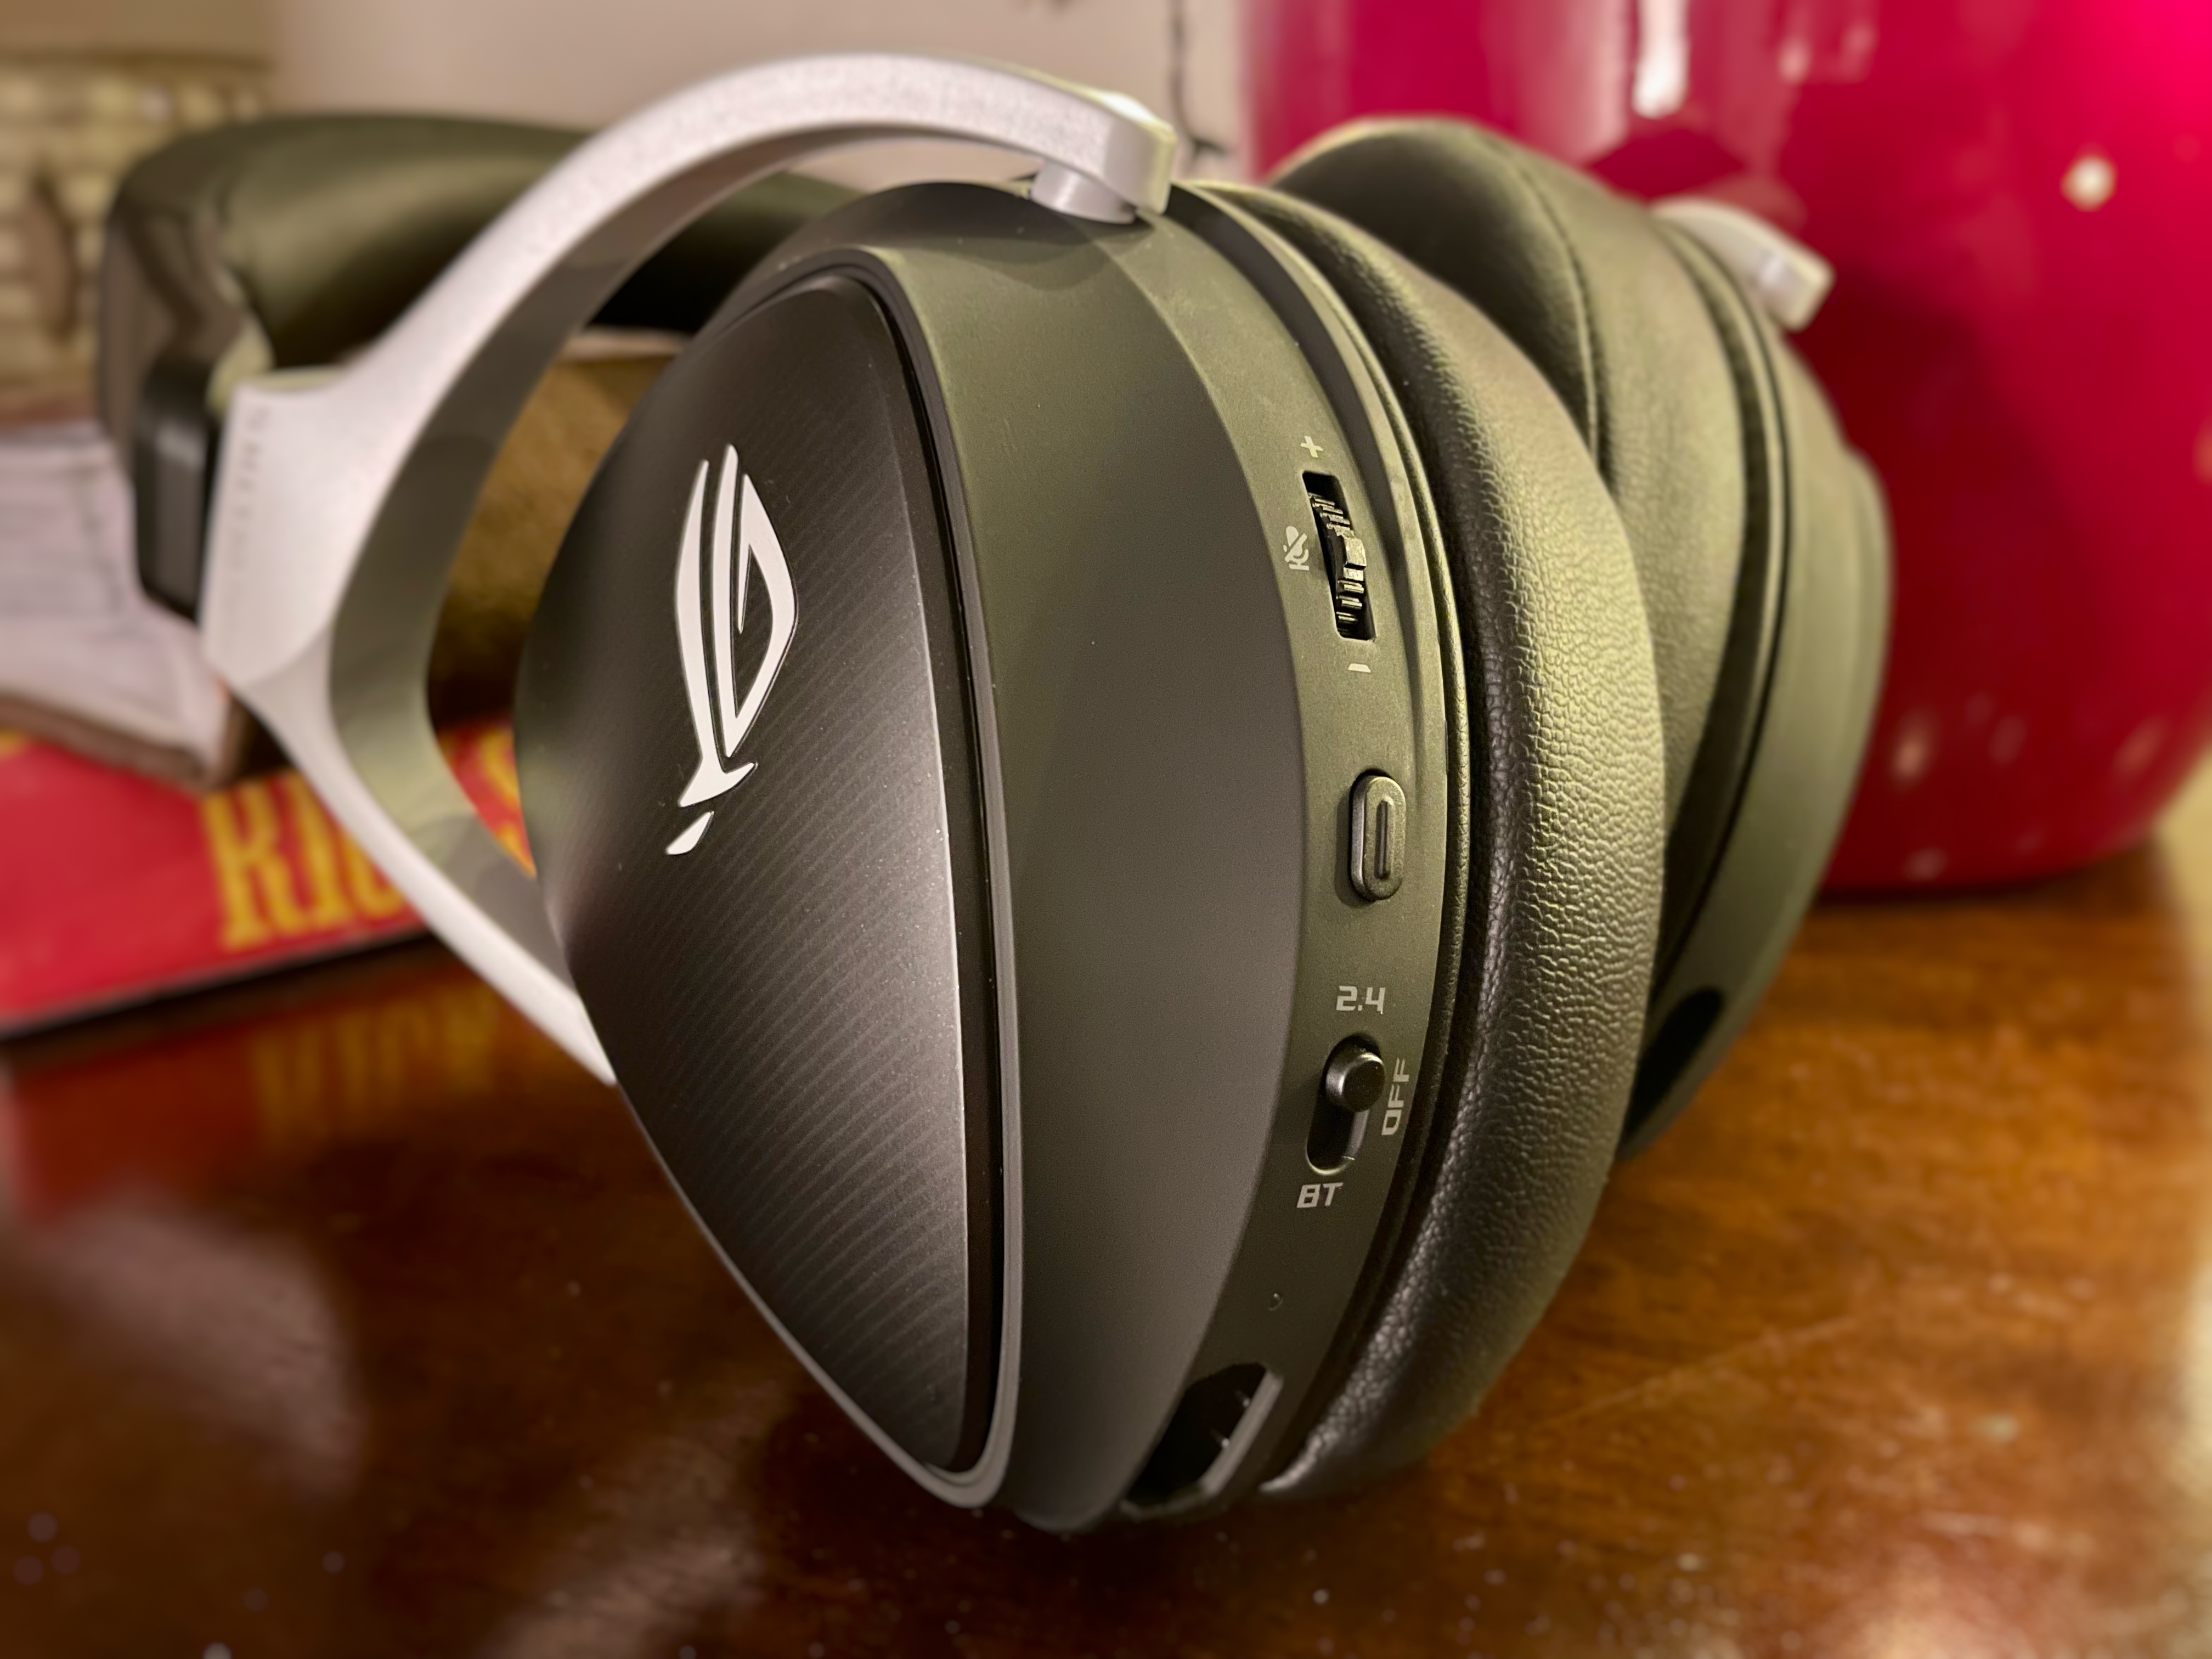 The underside of the ROG Delta S Wireless gaming headset.